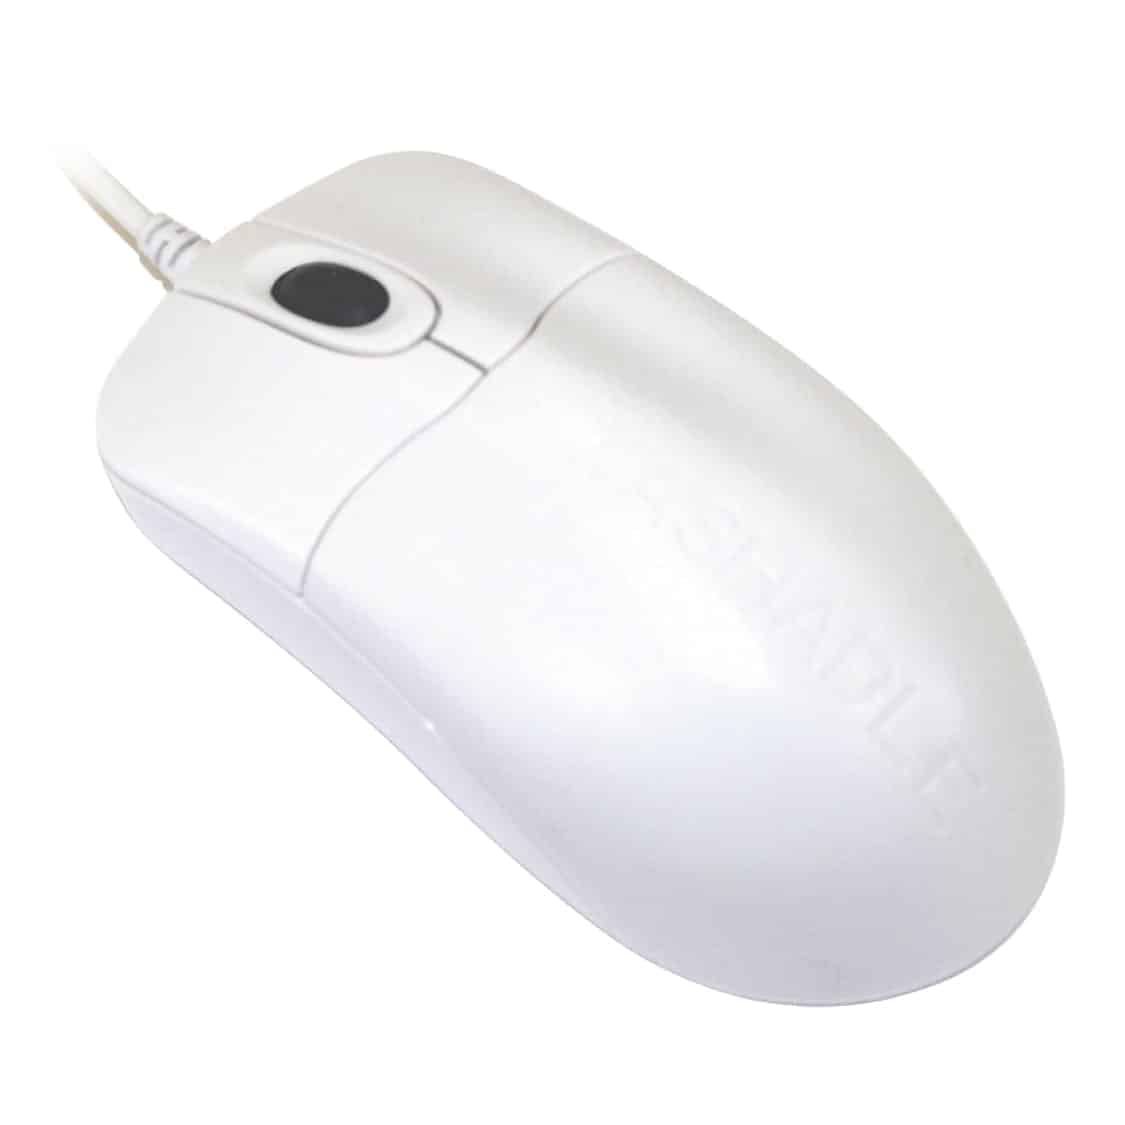 SILVER Storm White Scroll Mouse